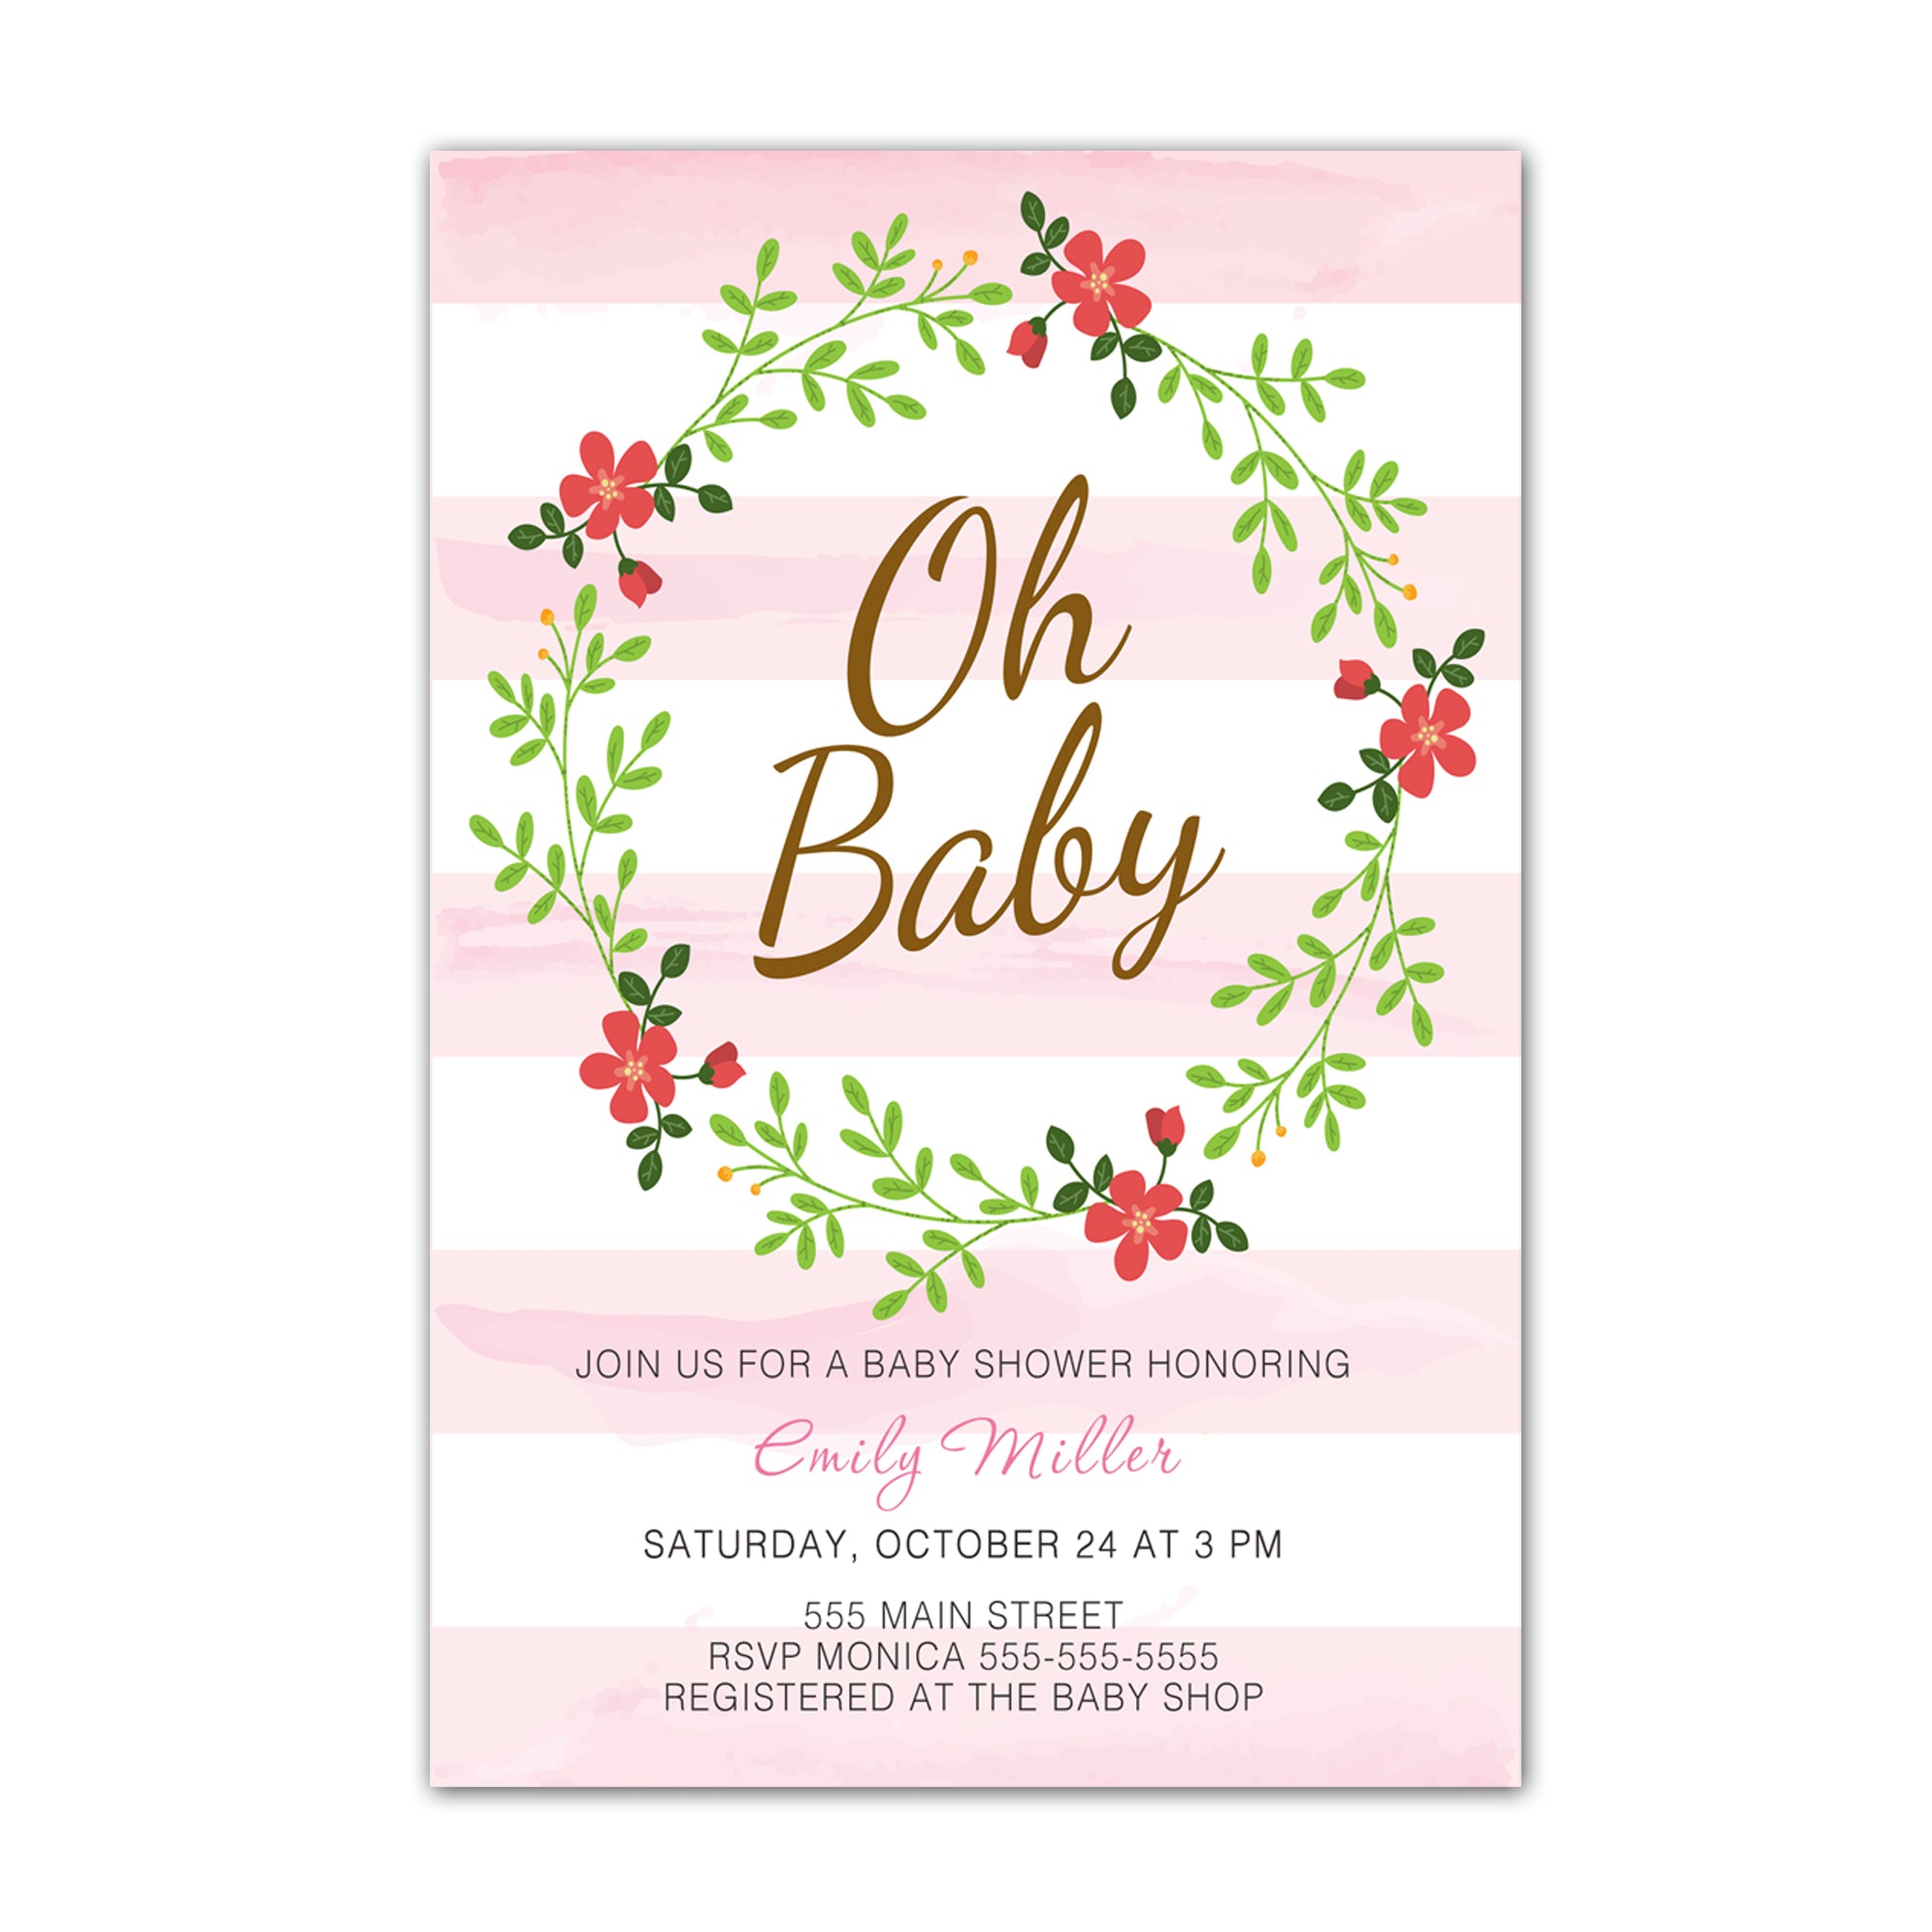 30 Oh baby invitations girl shower pink watercolor stripes floral & envelopes